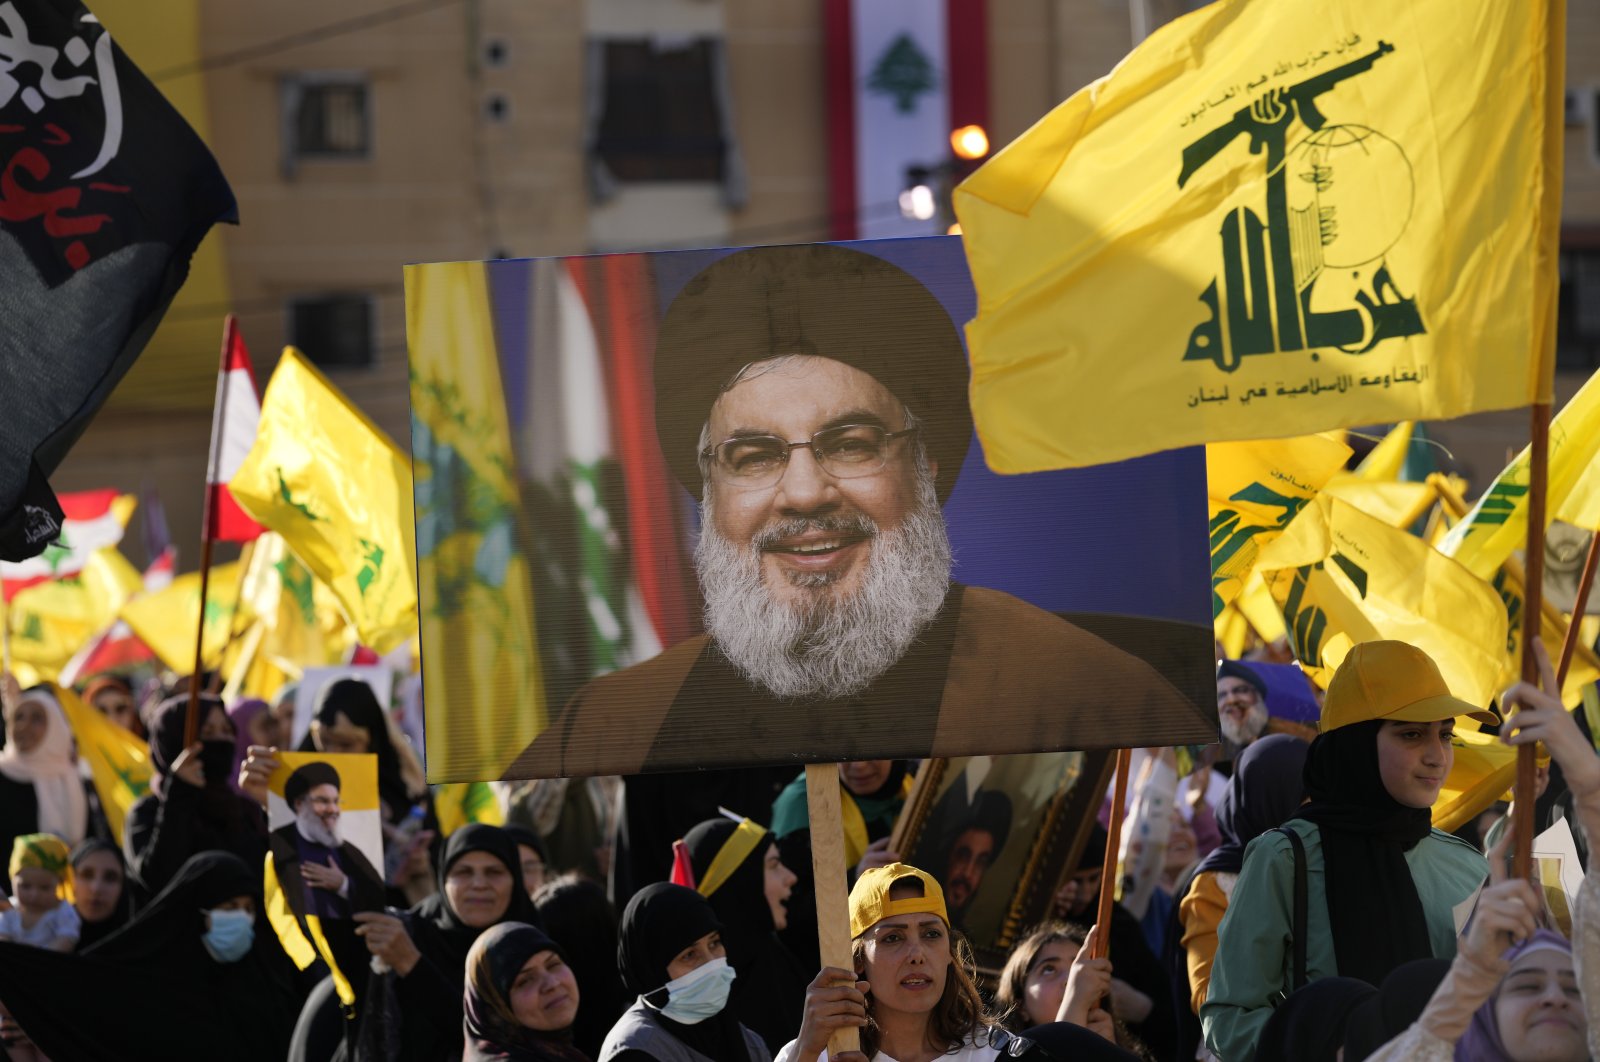 Hezbollah supporters wave portraits of Hezbollah leader Sayyed Hassan Nasrallah and their group flags, during an election campaign, in the southern suburb of Beirut, Lebanon, May 10, 2022. (AP Photo)